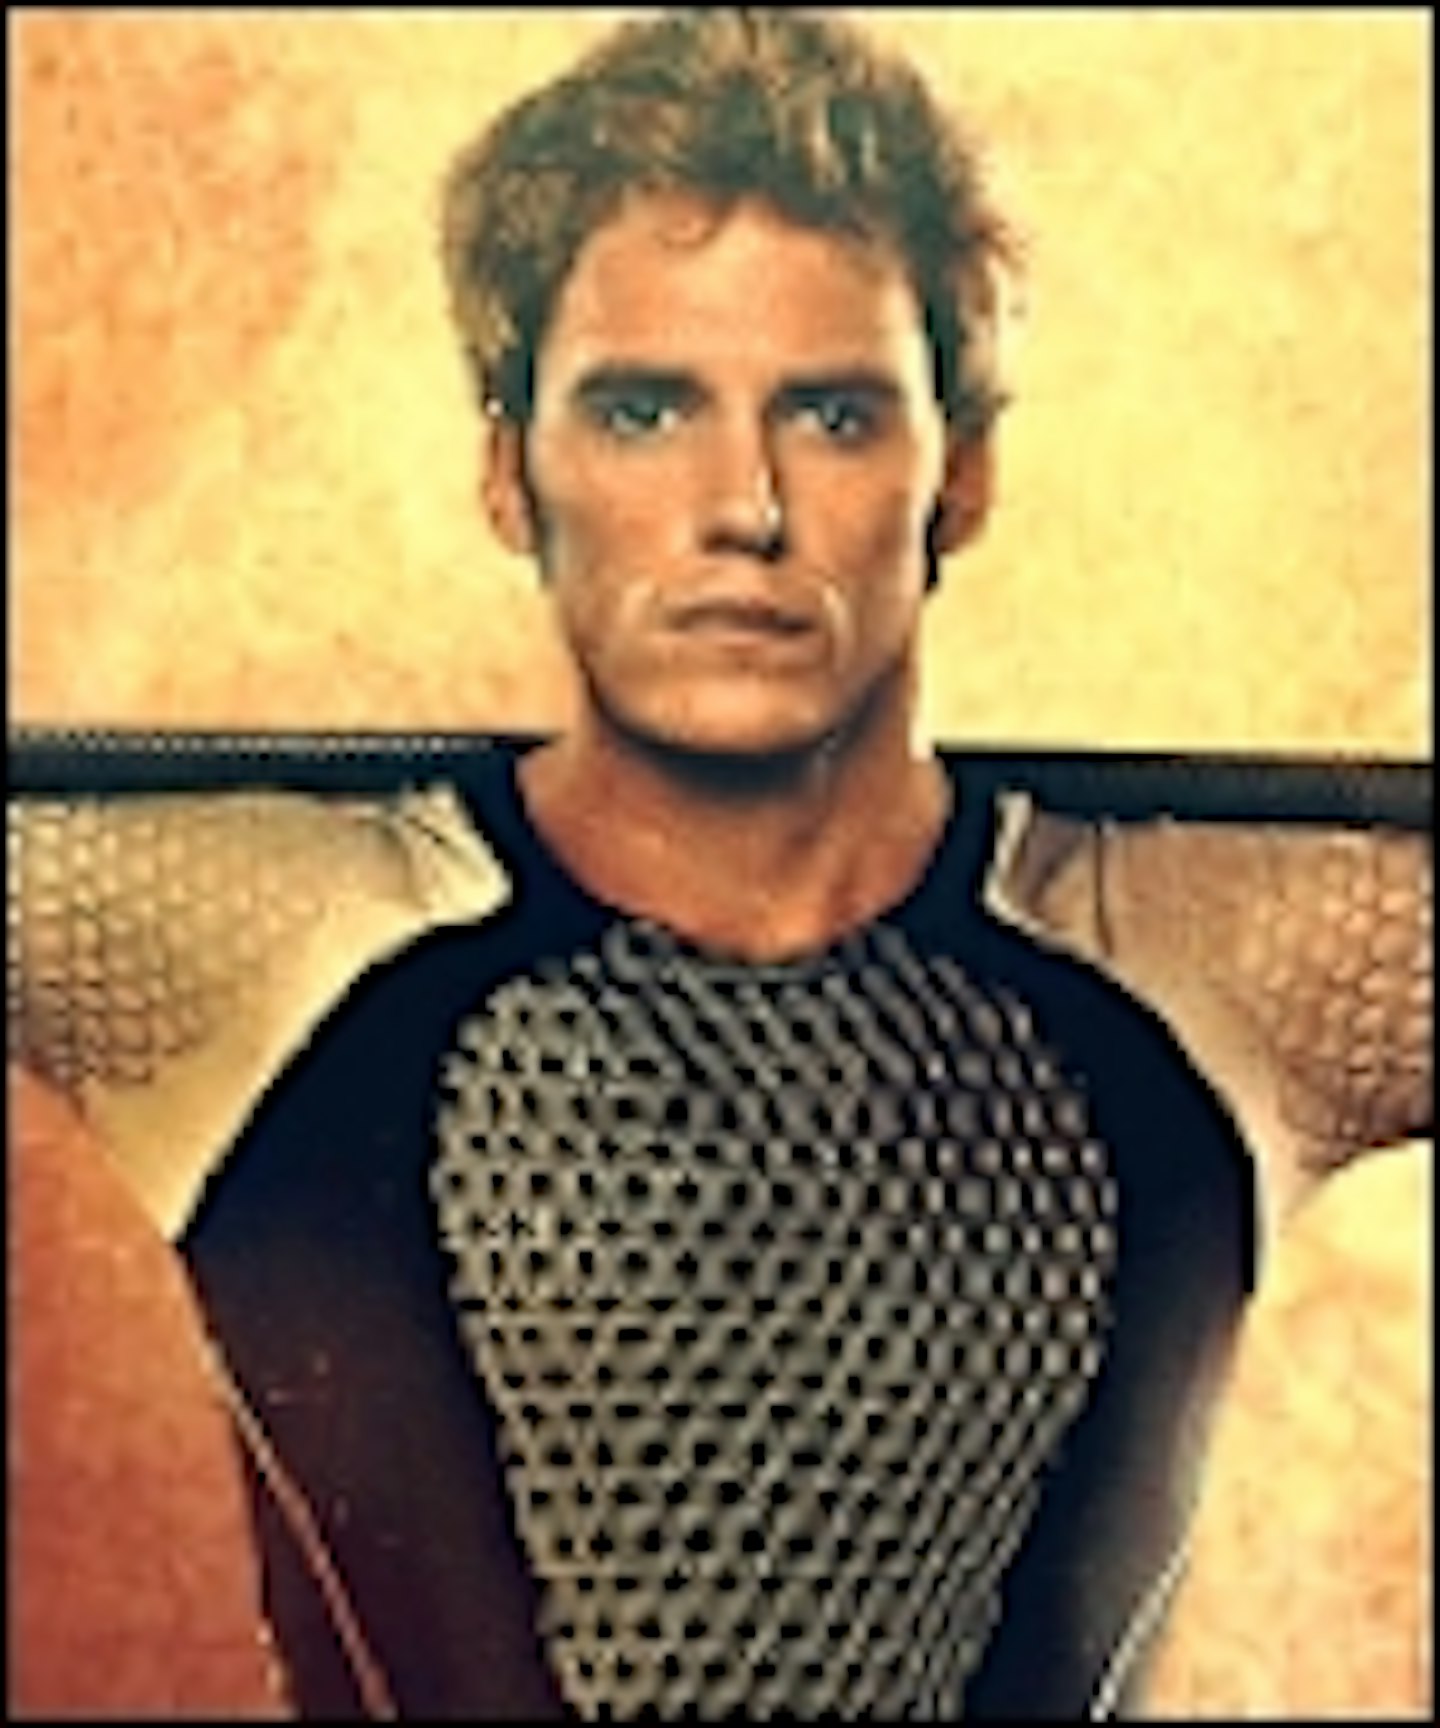 Full New Hunger Games: Catching Fire Banner Revealed